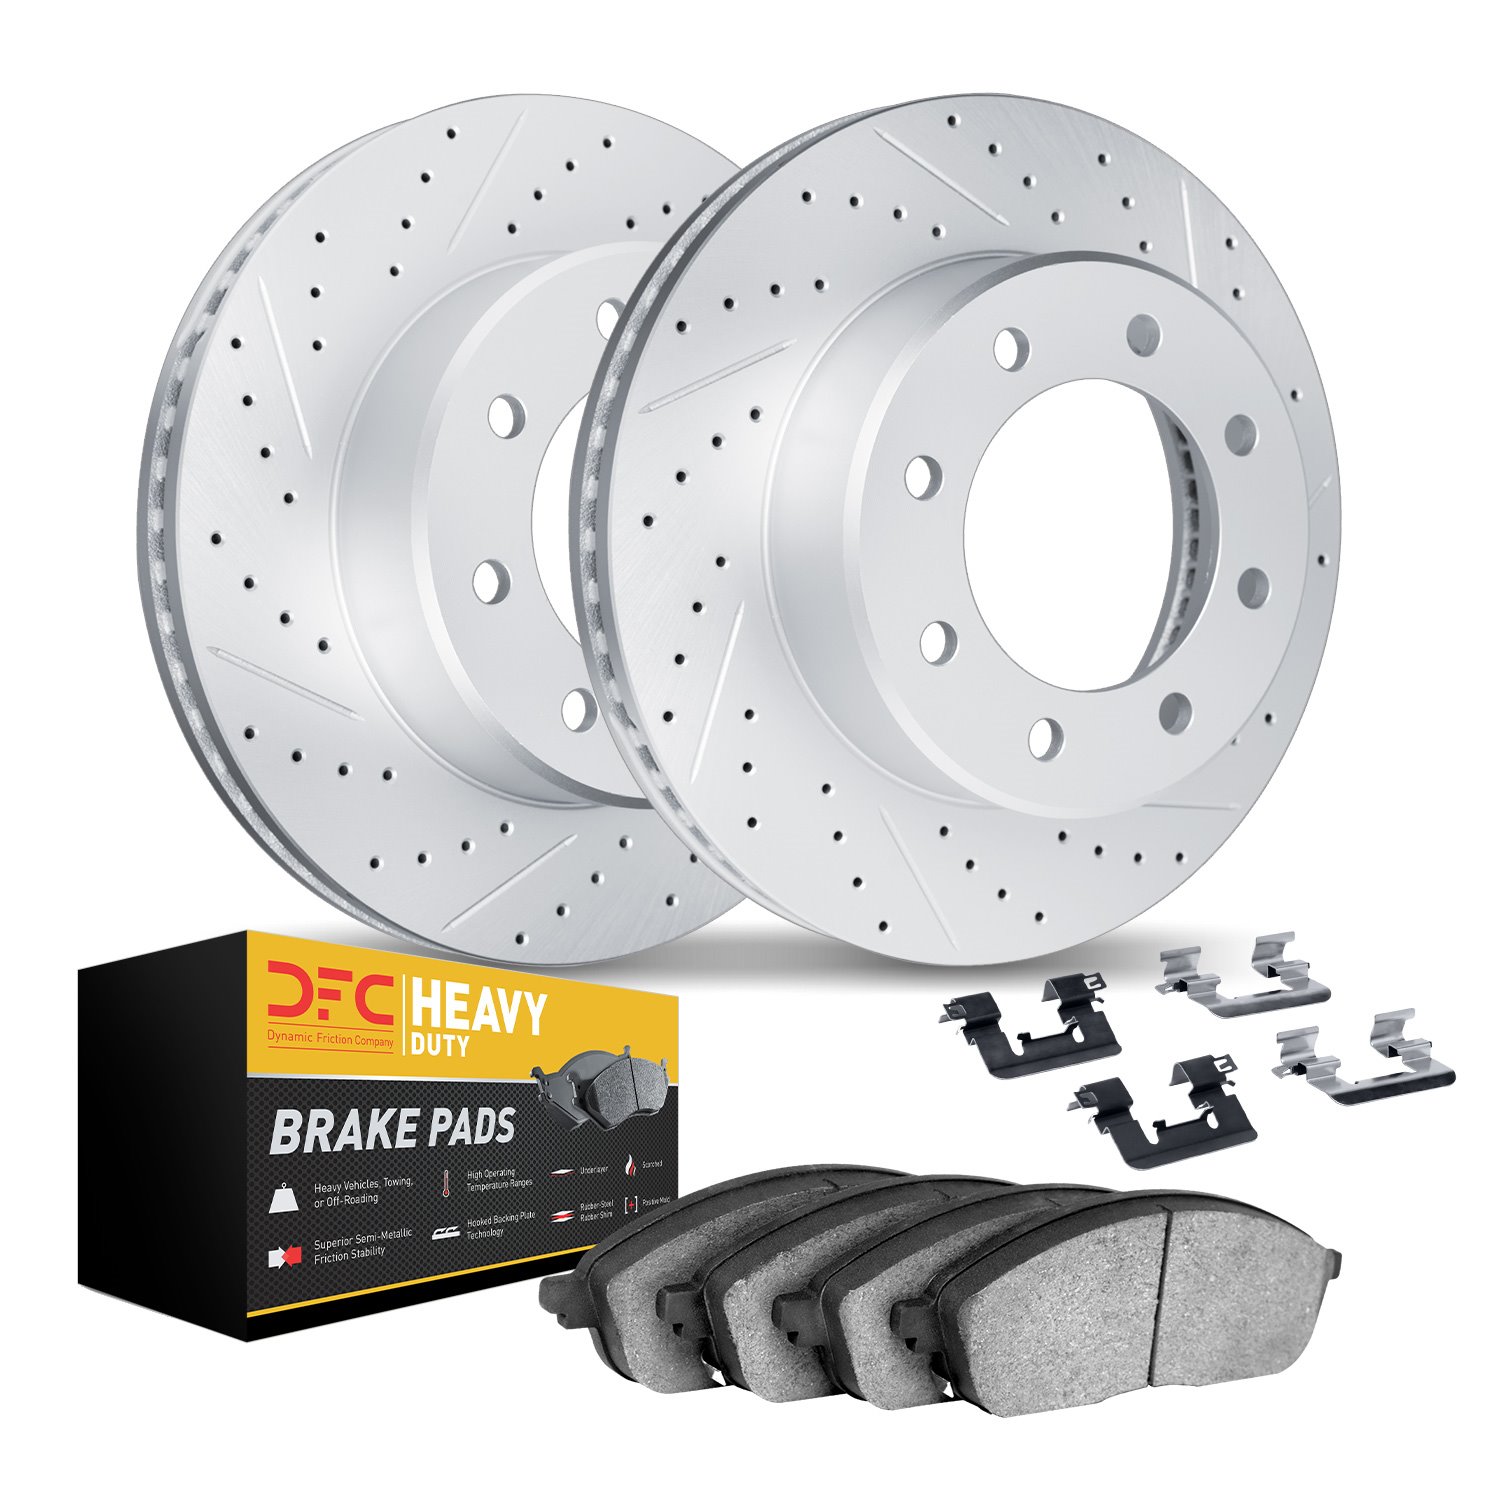 2212-99073 Geoperformance Drilled/Slotted Rotors w/Heavy-Duty Pads Kit & Hardware, 1986-1994 Ford/Lincoln/Mercury/Mazda, Positio